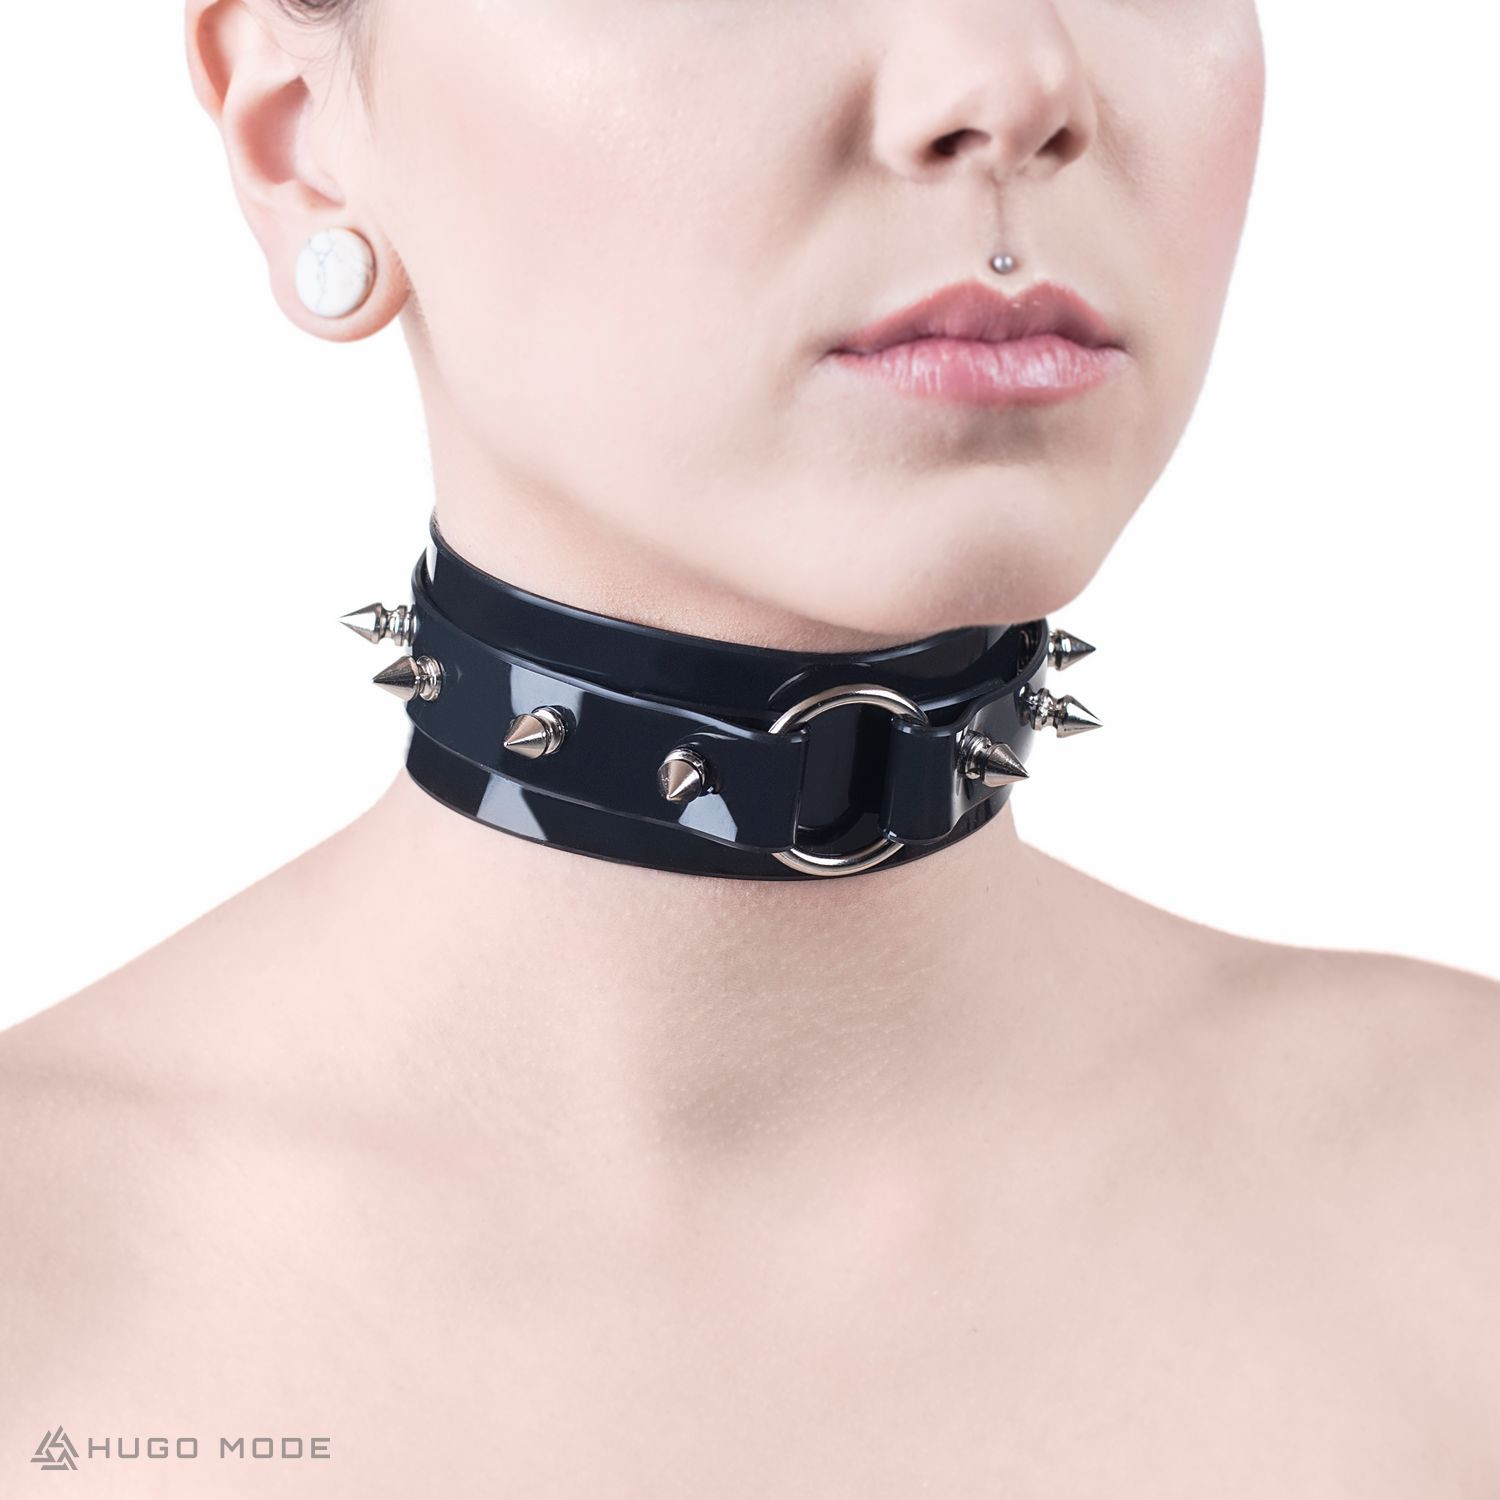 A wide choker with spikes and a ring.